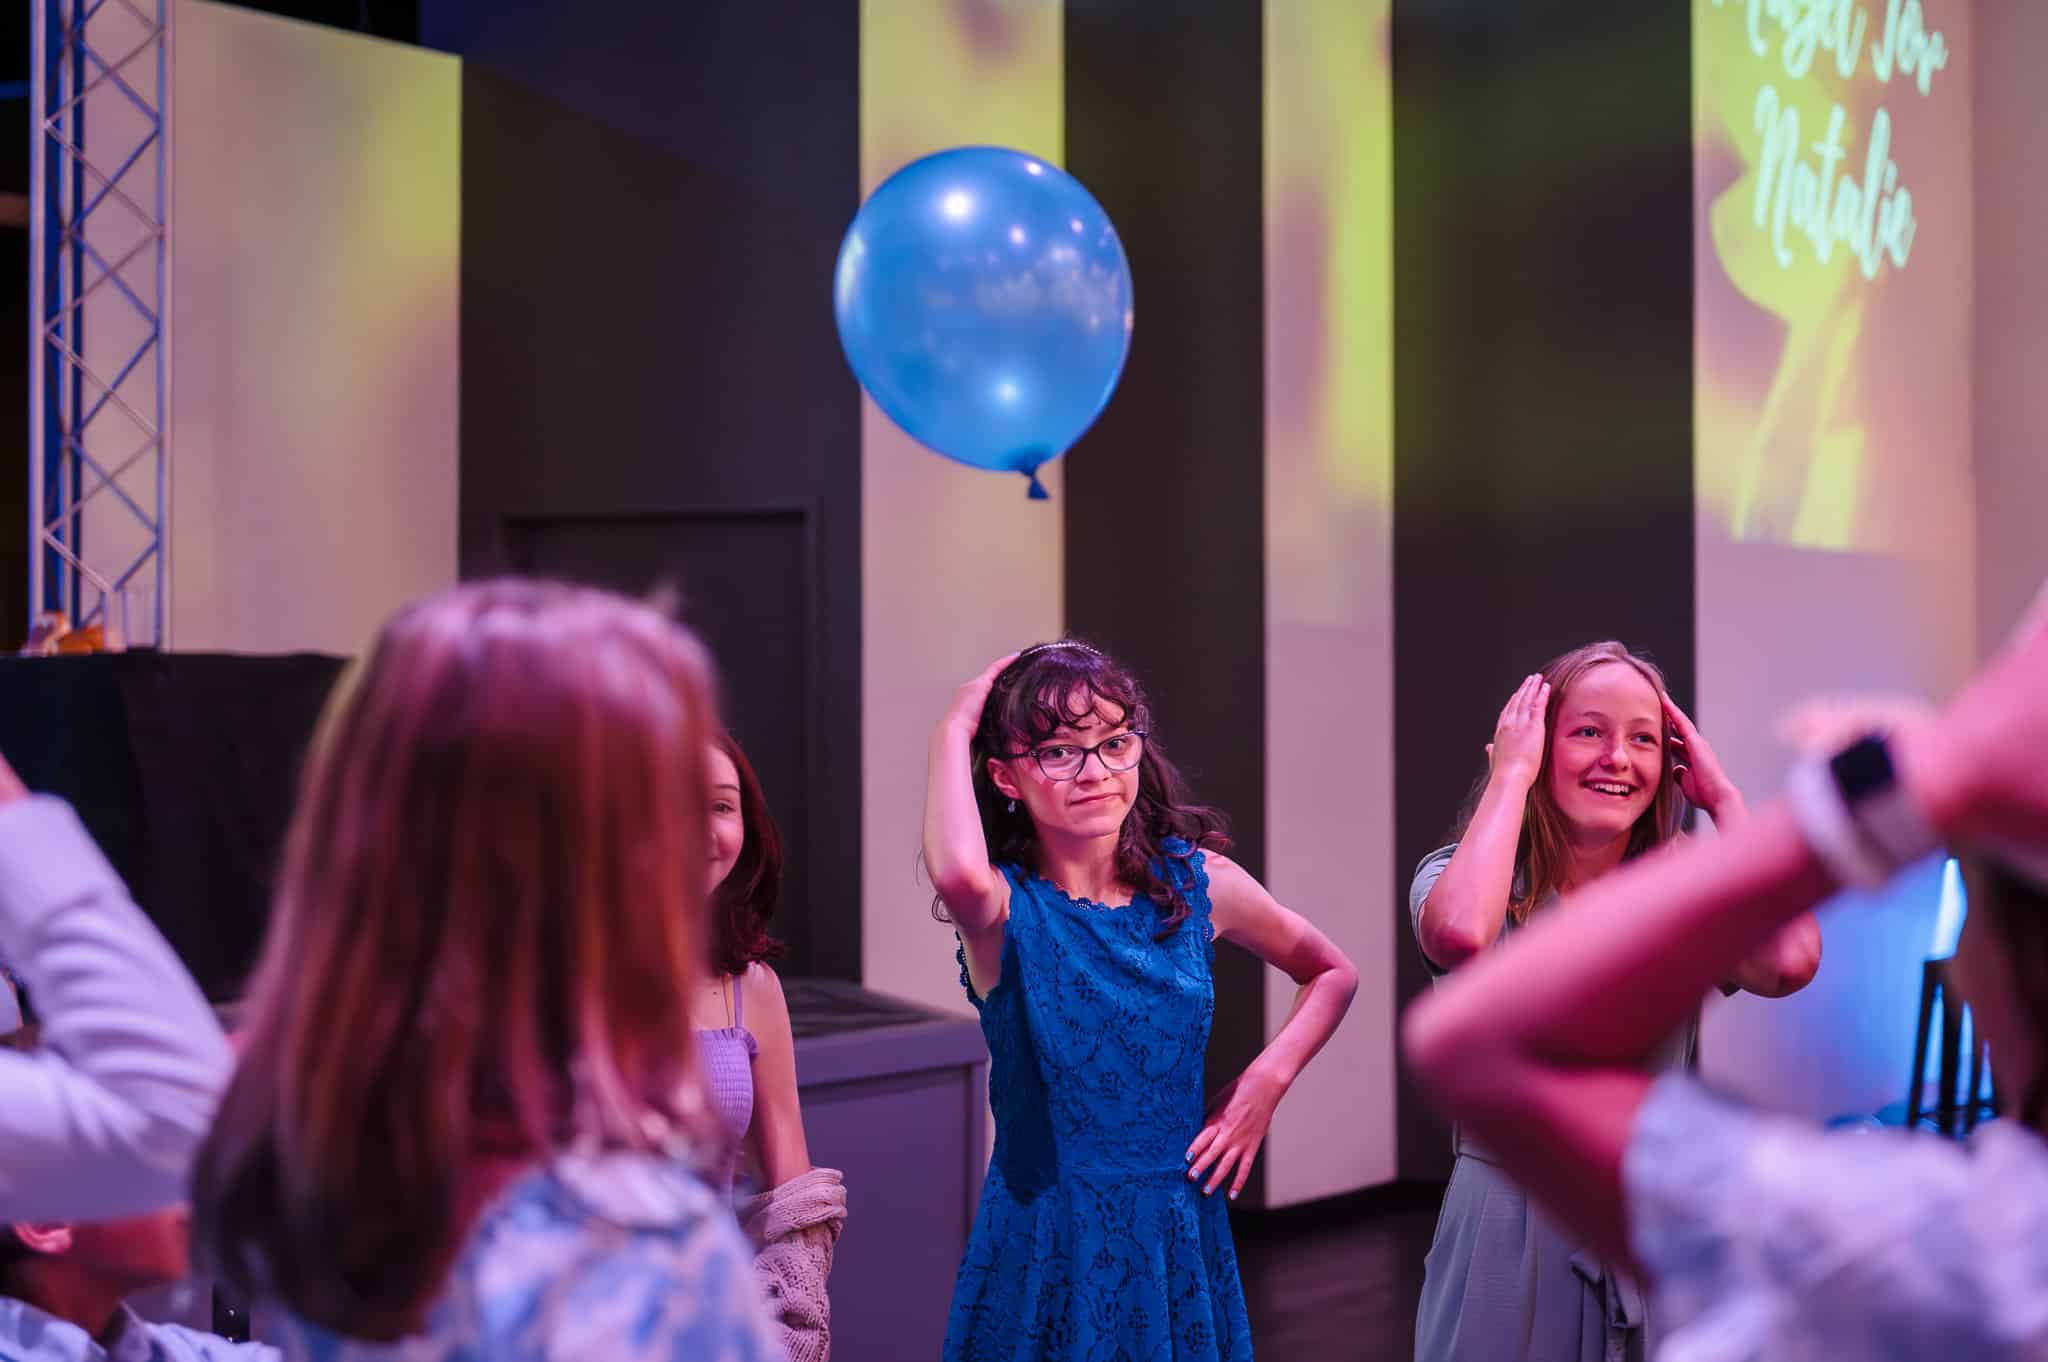 Young teens attempt to keep balloon airborne and dance the macarena during a bat mitzvah.